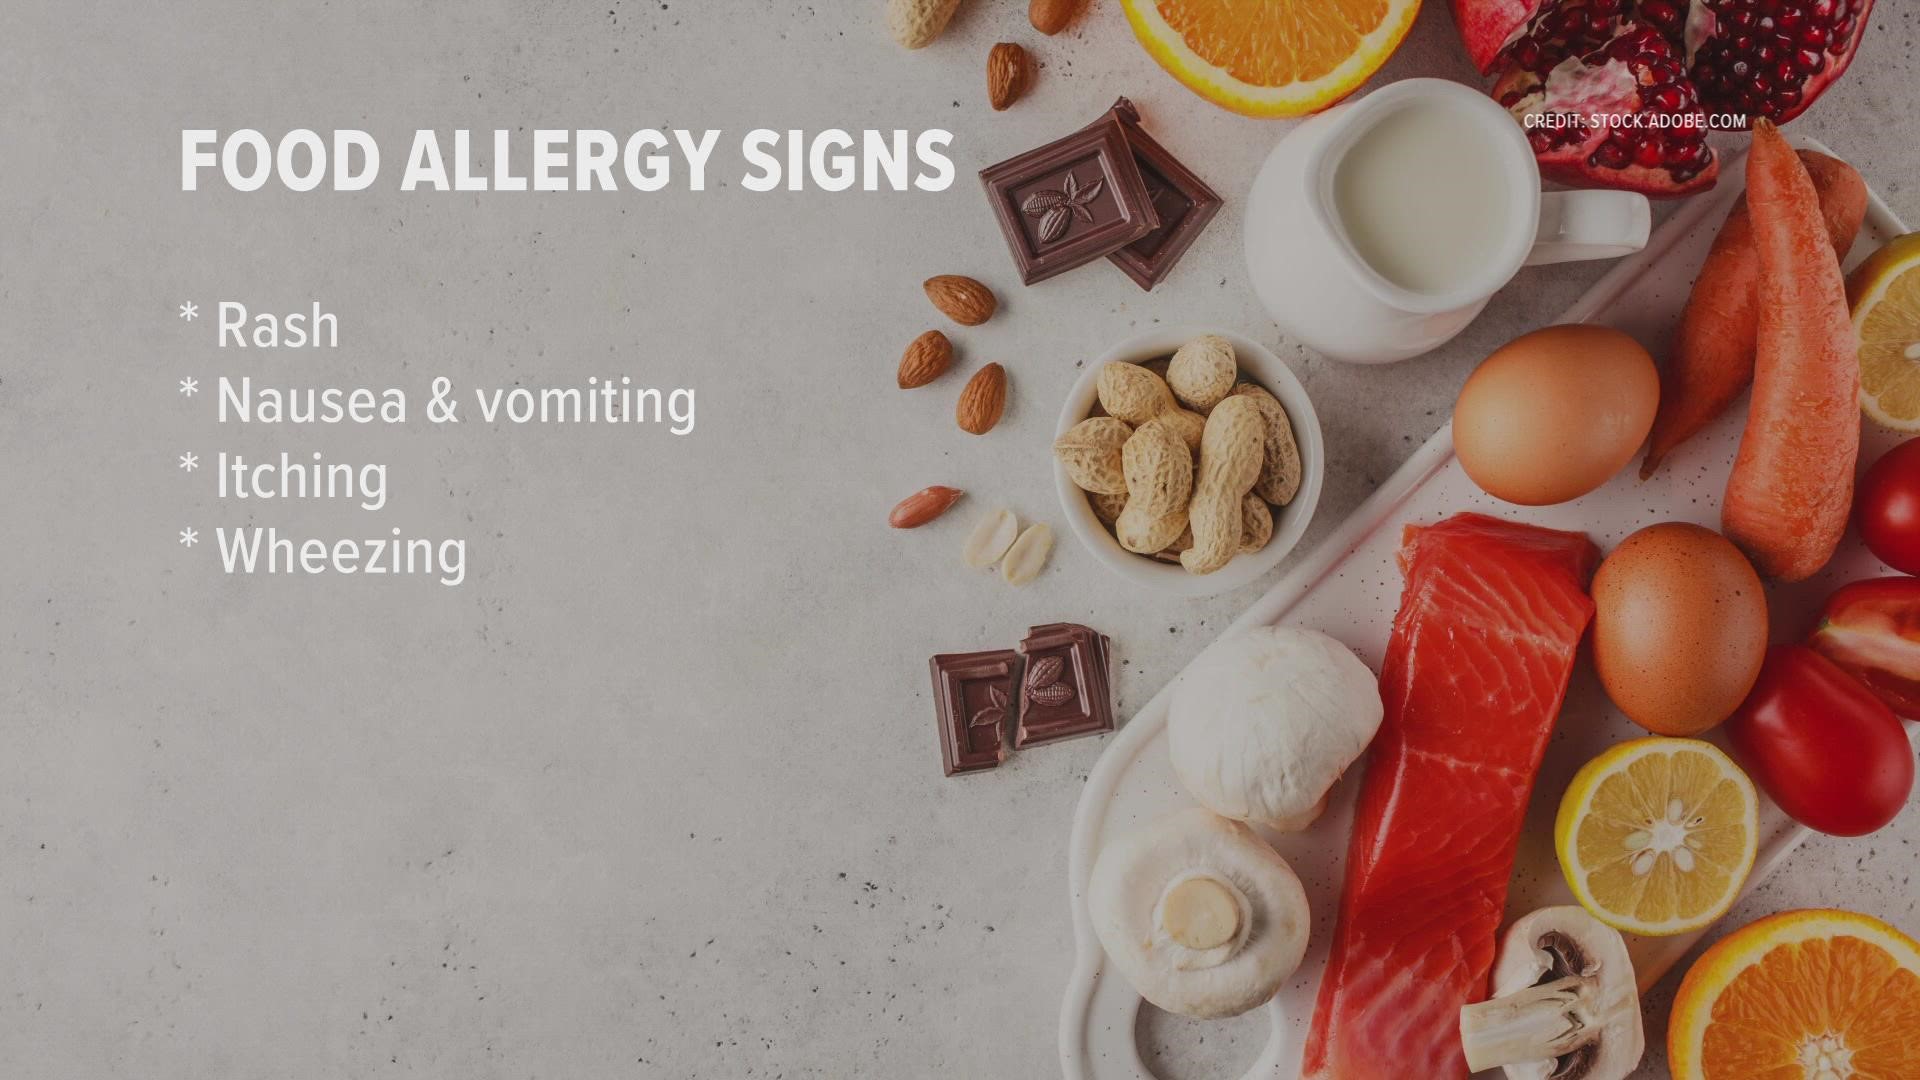 9Health Expert Dr. Payal Kohli discusses common food allergies in kids, and what parents should do if their child has an allergic reaction.